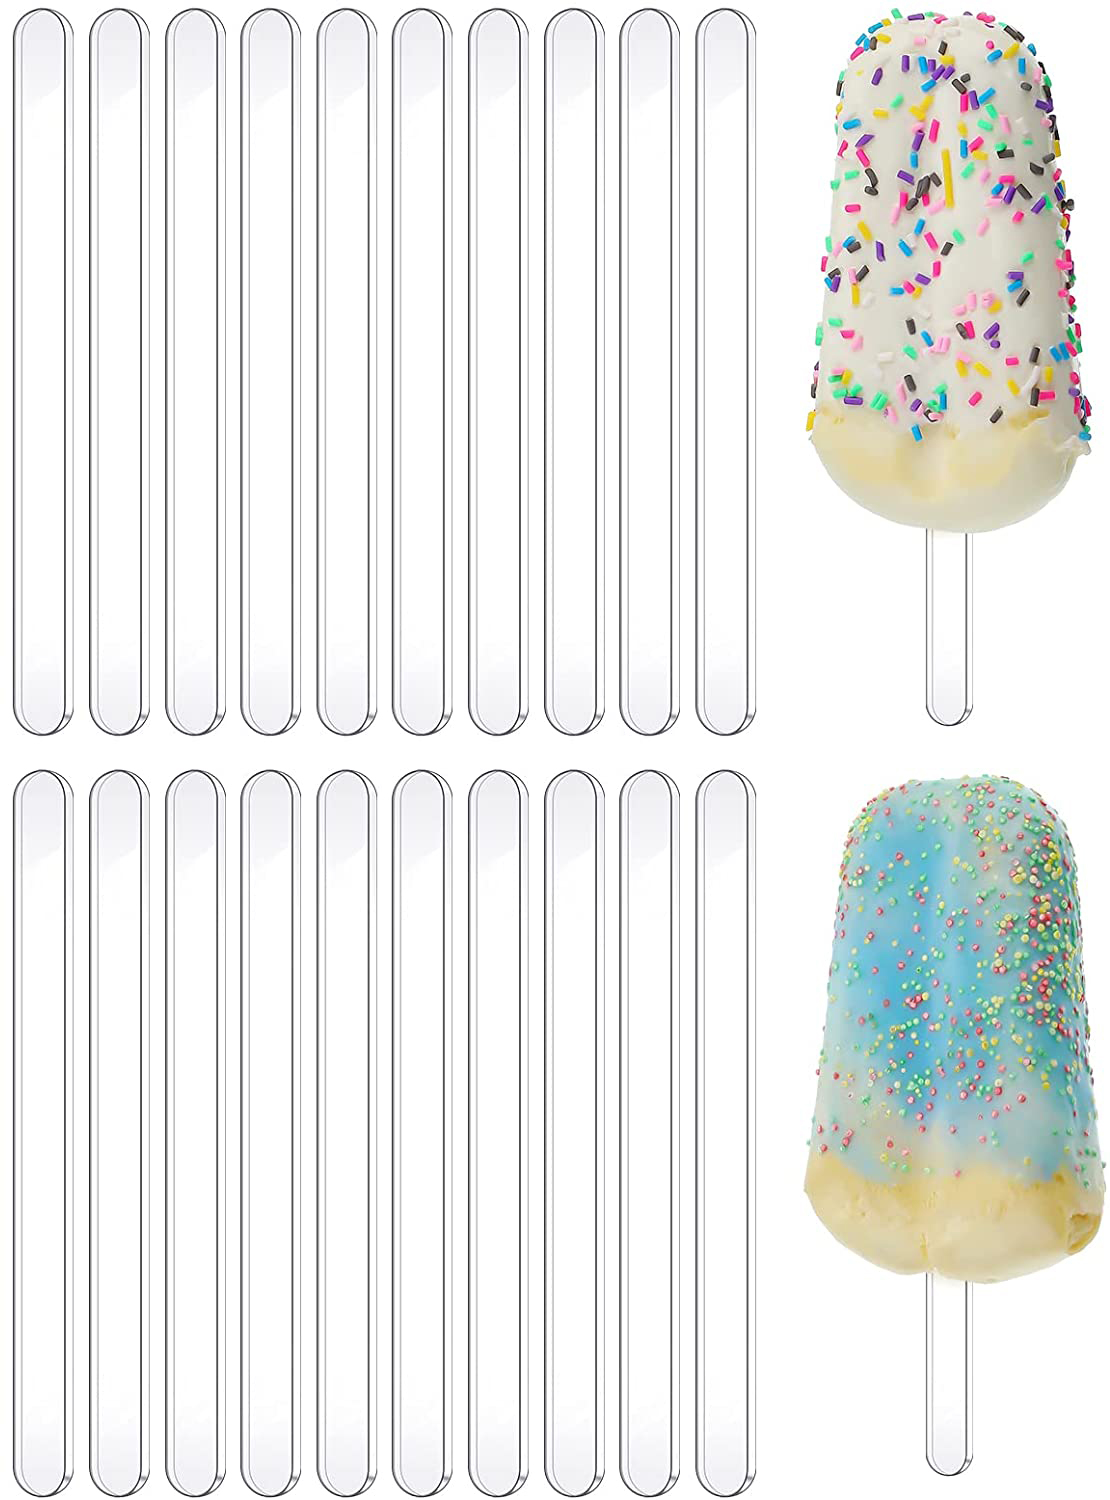 NOGIS 20 Pieces Acrylic Cakesicle Sticks 4.5 Inch Reusable Ice Cream Sticks  Ice Cream Sticks Mini Acrylic Craft Ice Cream Sticks for Candy Ice